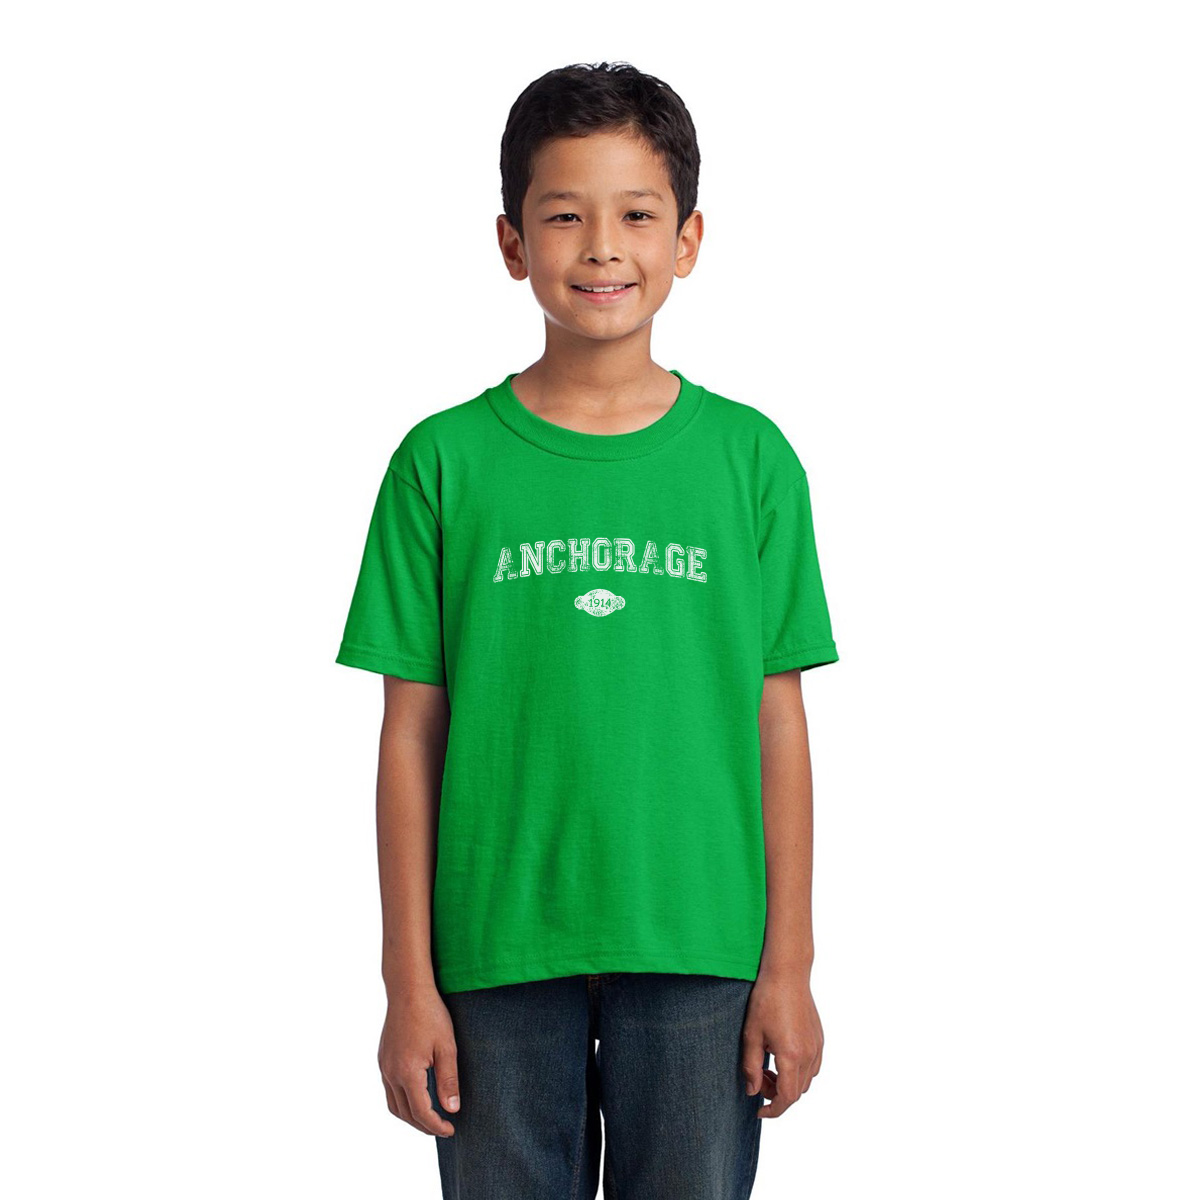 Anchorage 1914 Represent Toddler T-shirt | Green